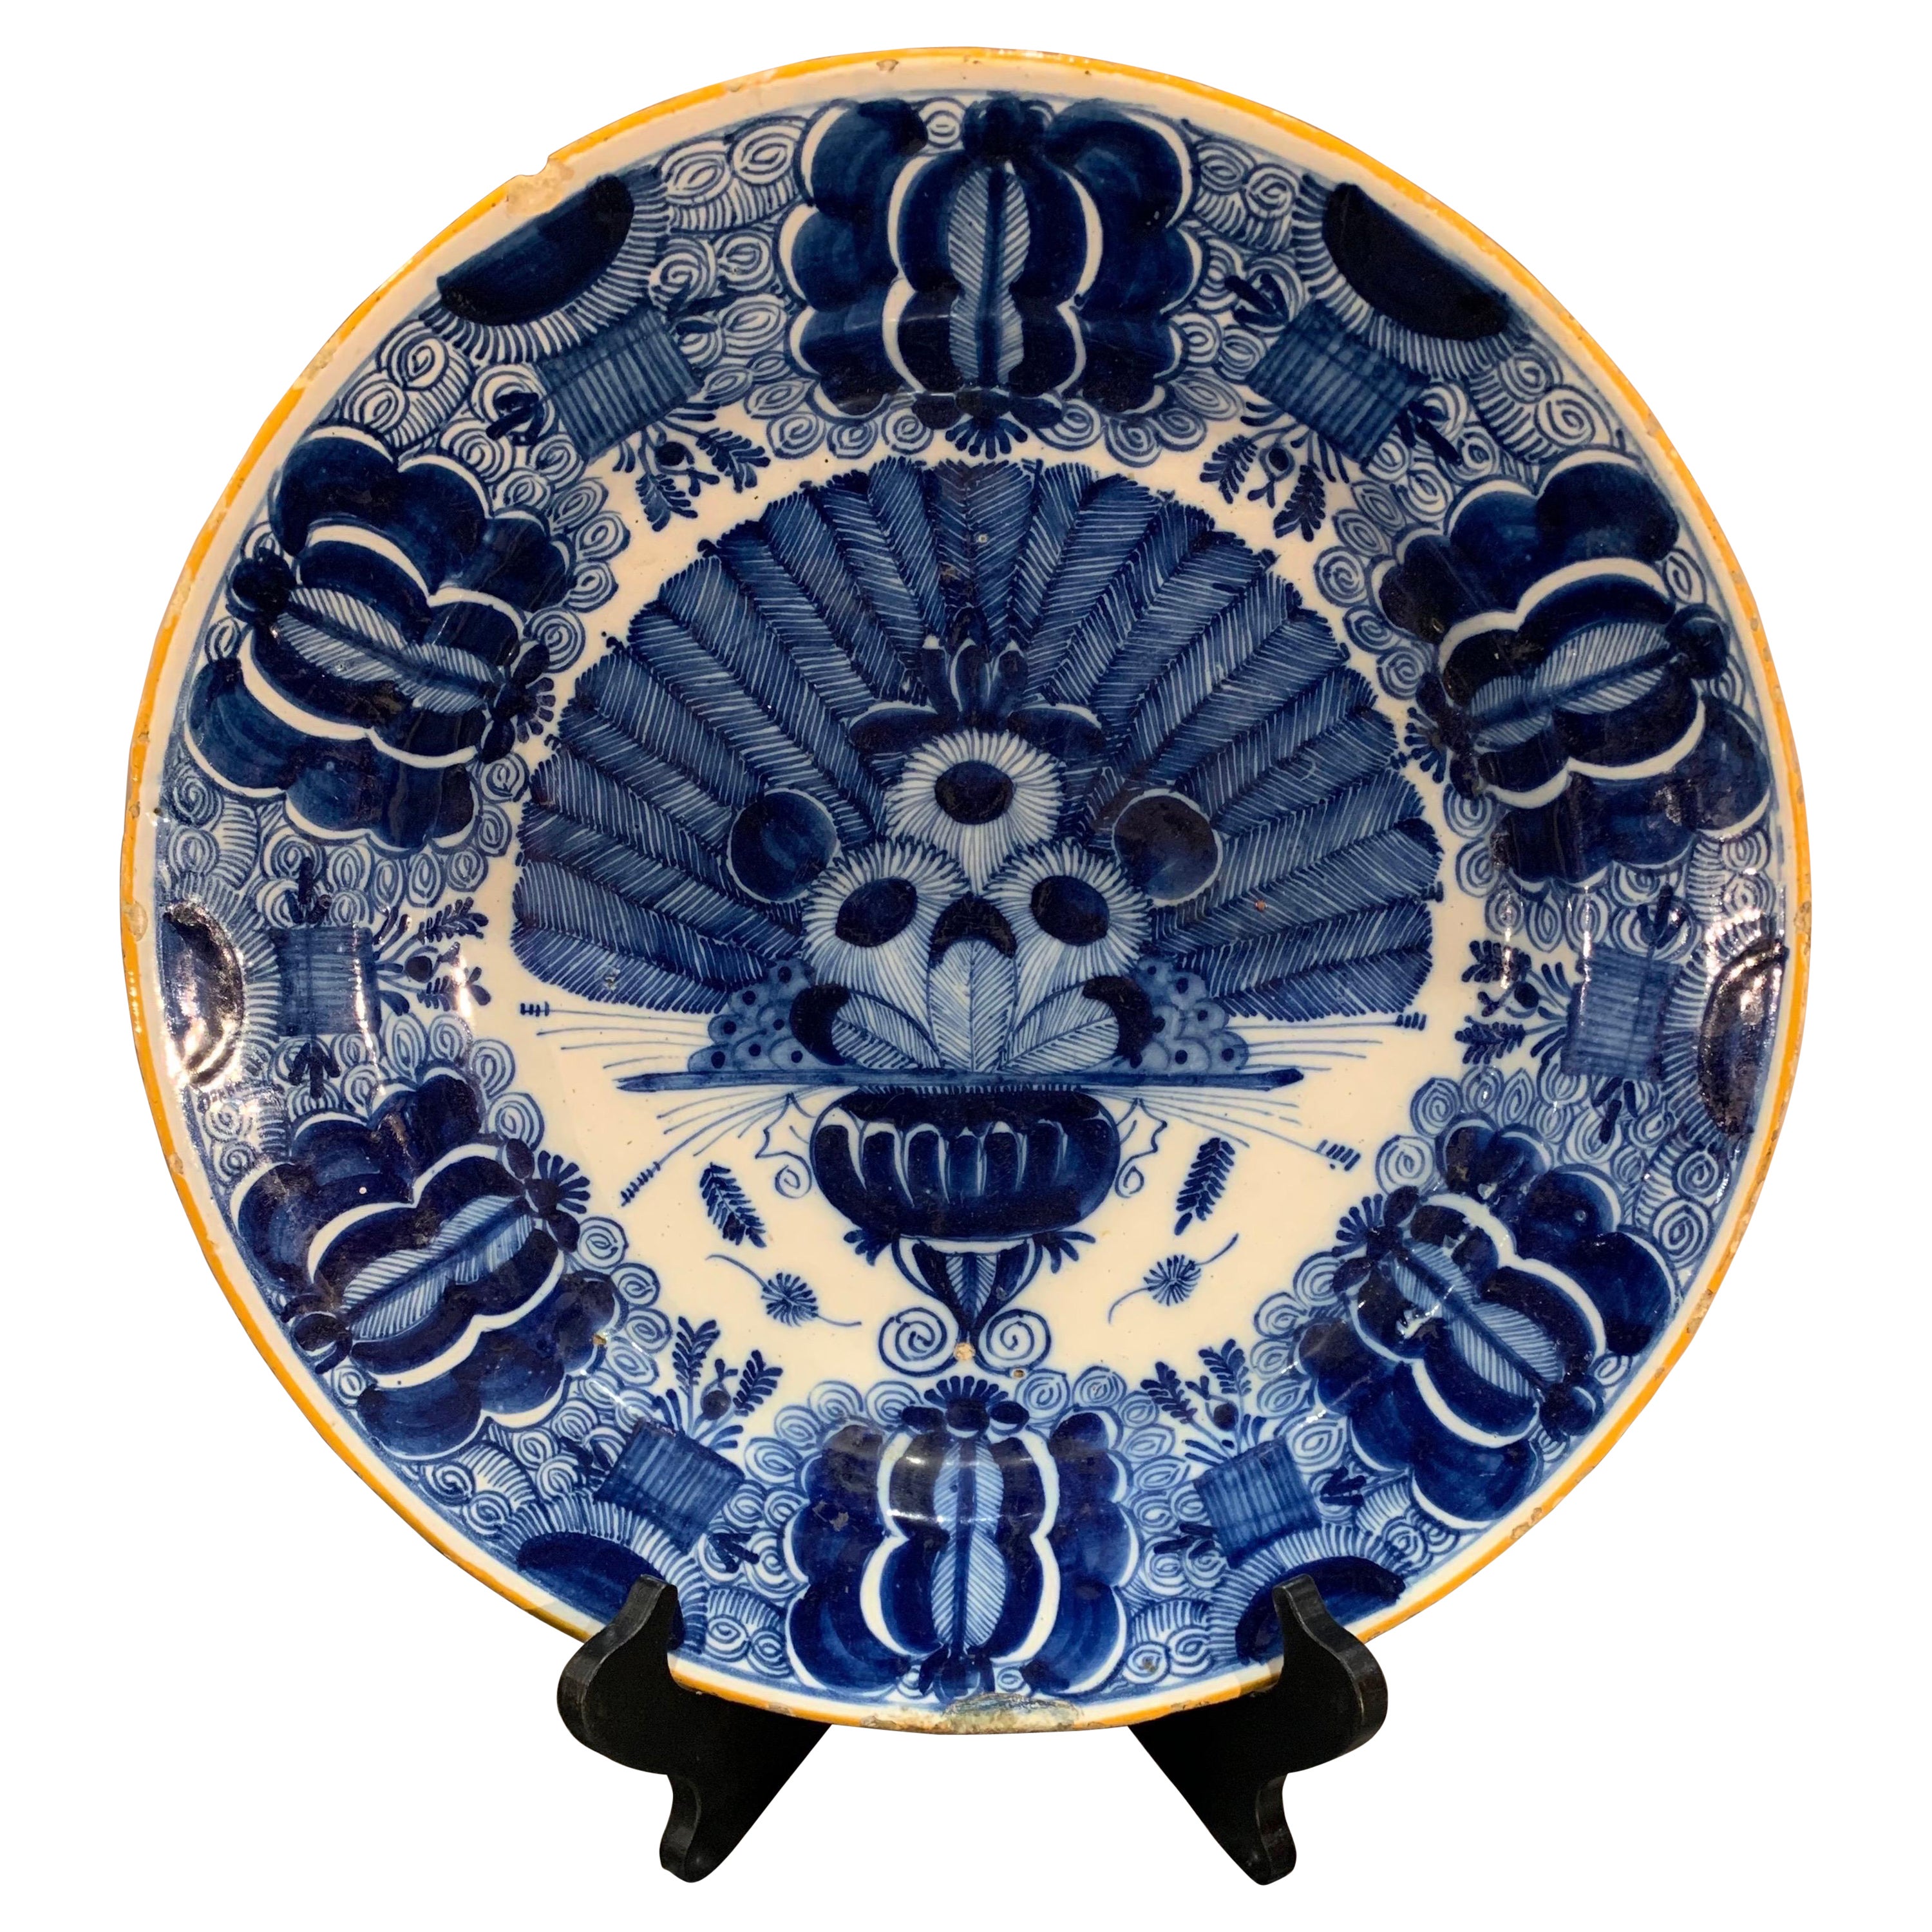 Early 19th Century Dutch Delft Peacock Pattern Bowl